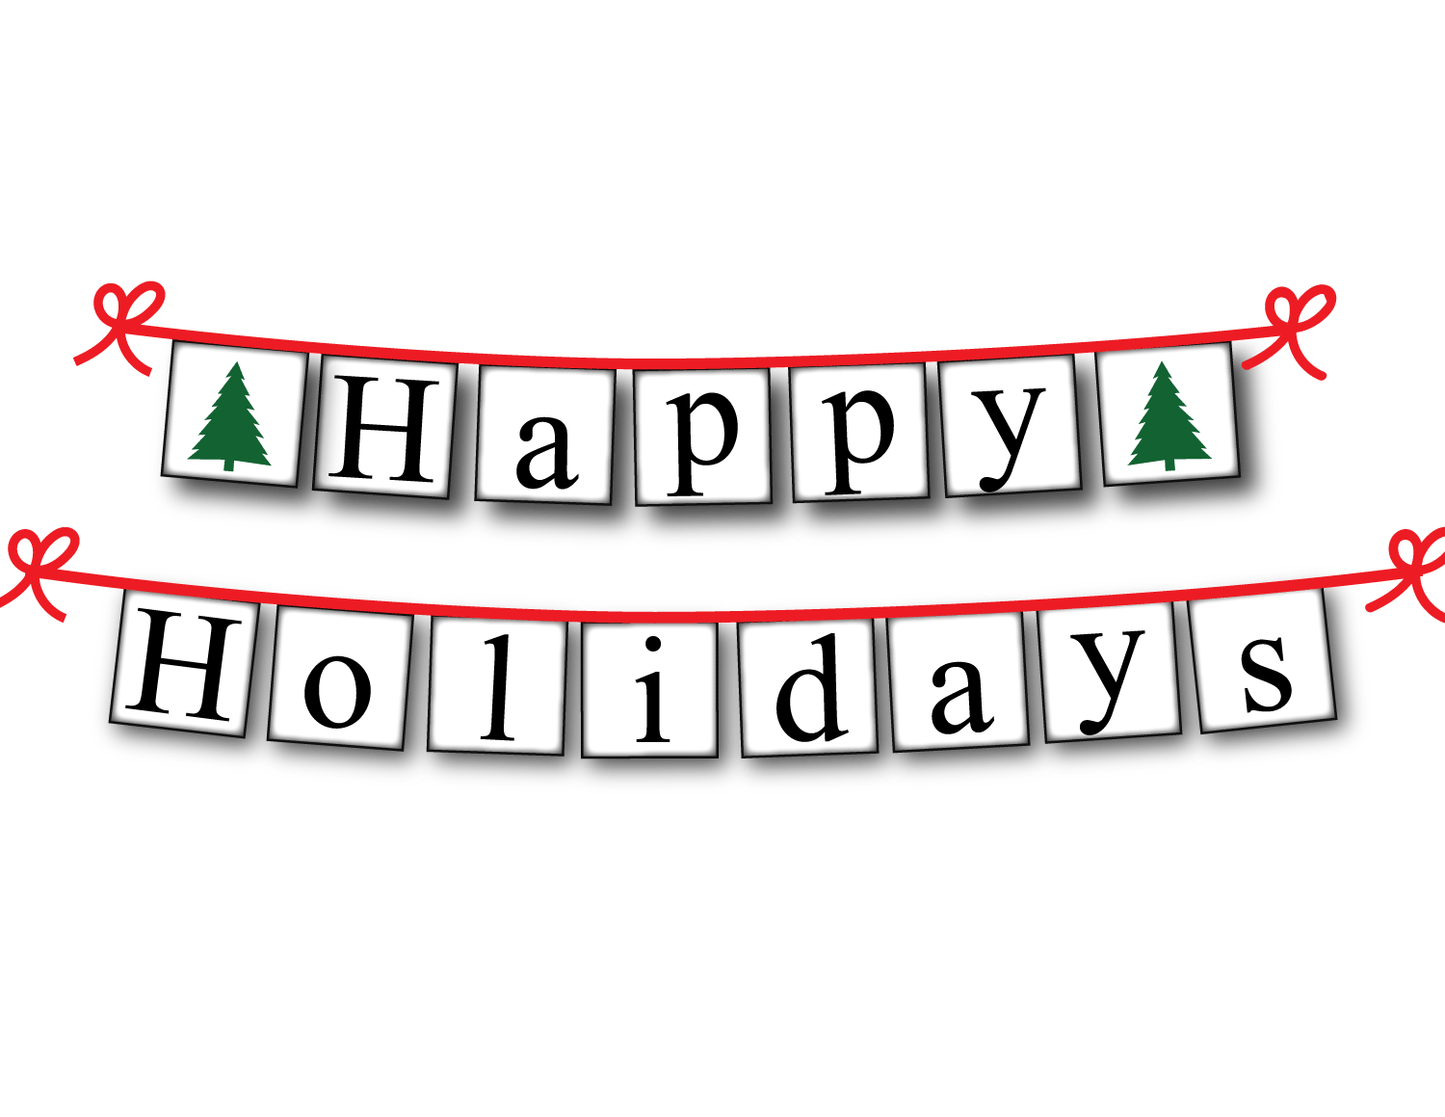 Happy Holidays banner with evergreen trees - Christmas Decoration - Celebrating Together